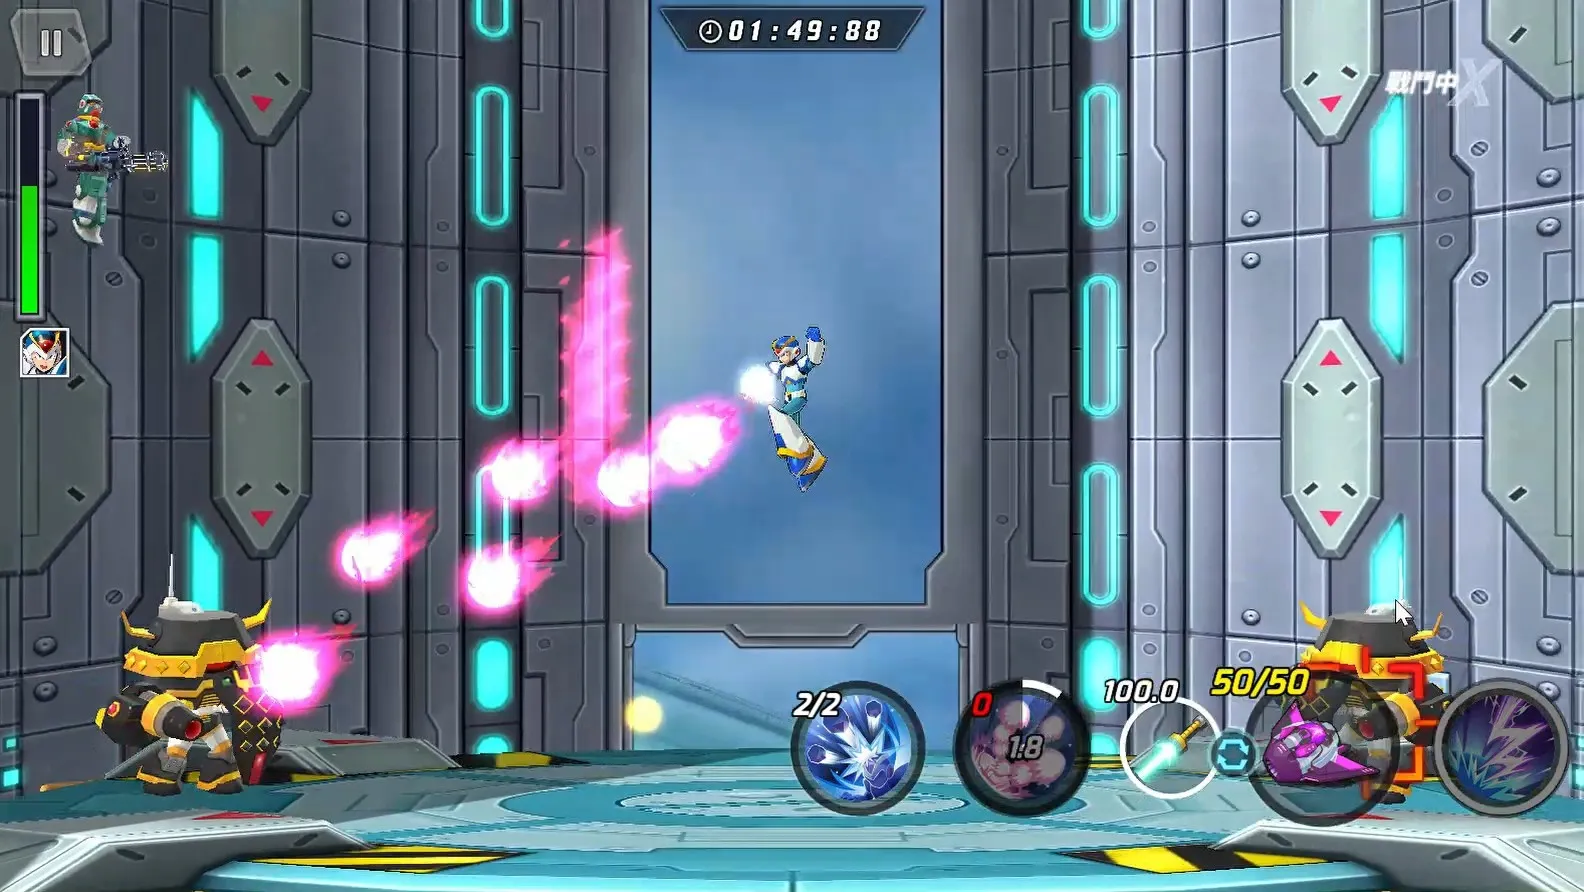 mega-man-x-dive-is-ending-on-both-the-pc-via-steam-and-mobile-devices-in-september-but-mega-man-x-dive-mobile-is-still-running.jpg